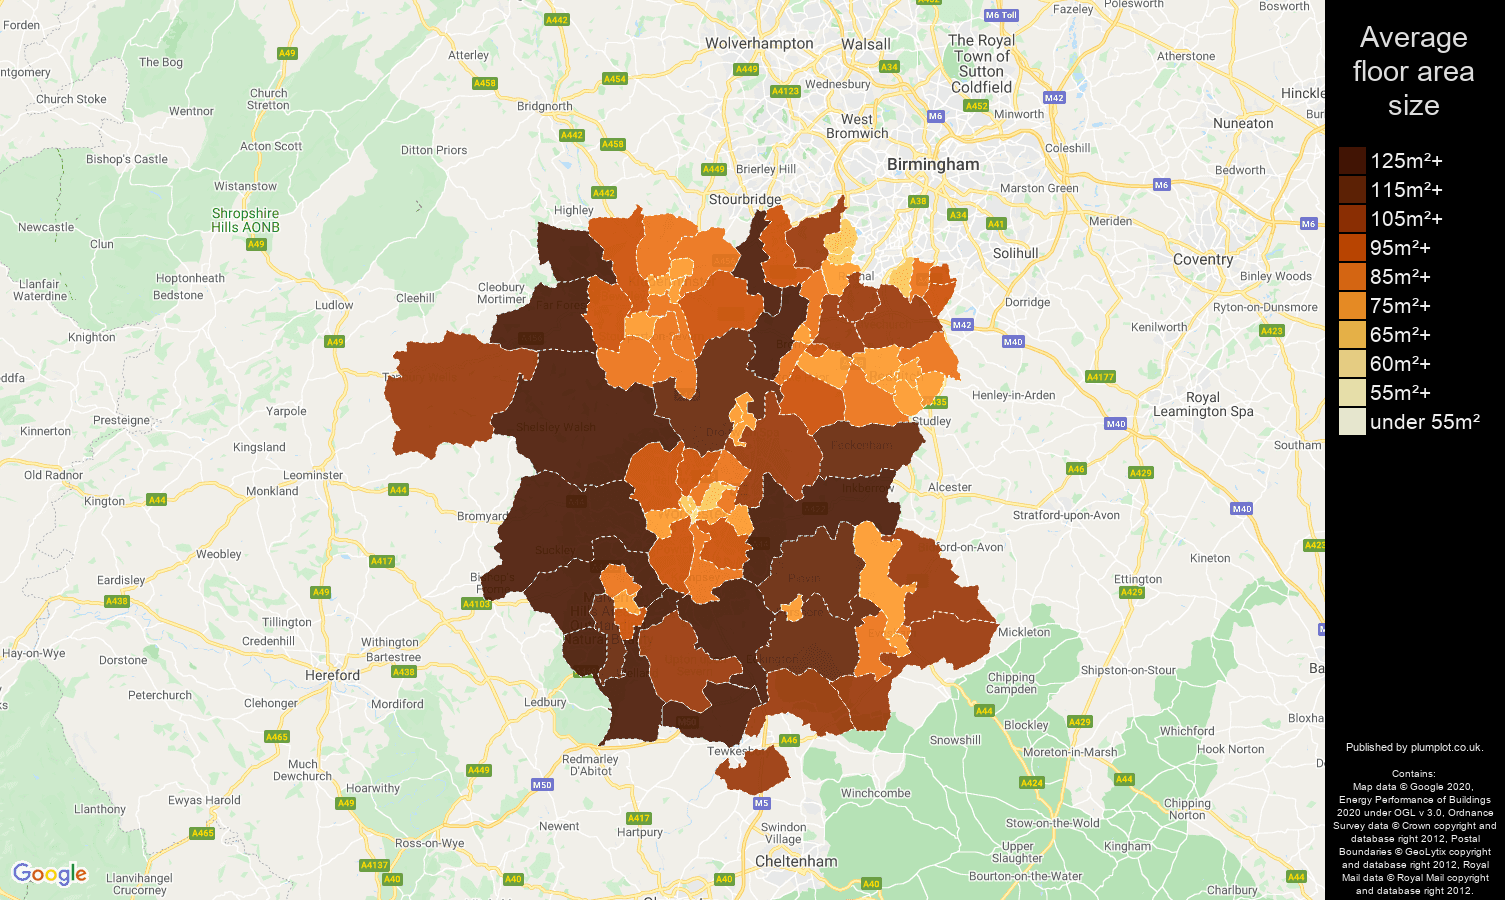 Worcestershire map of average floor area size of properties